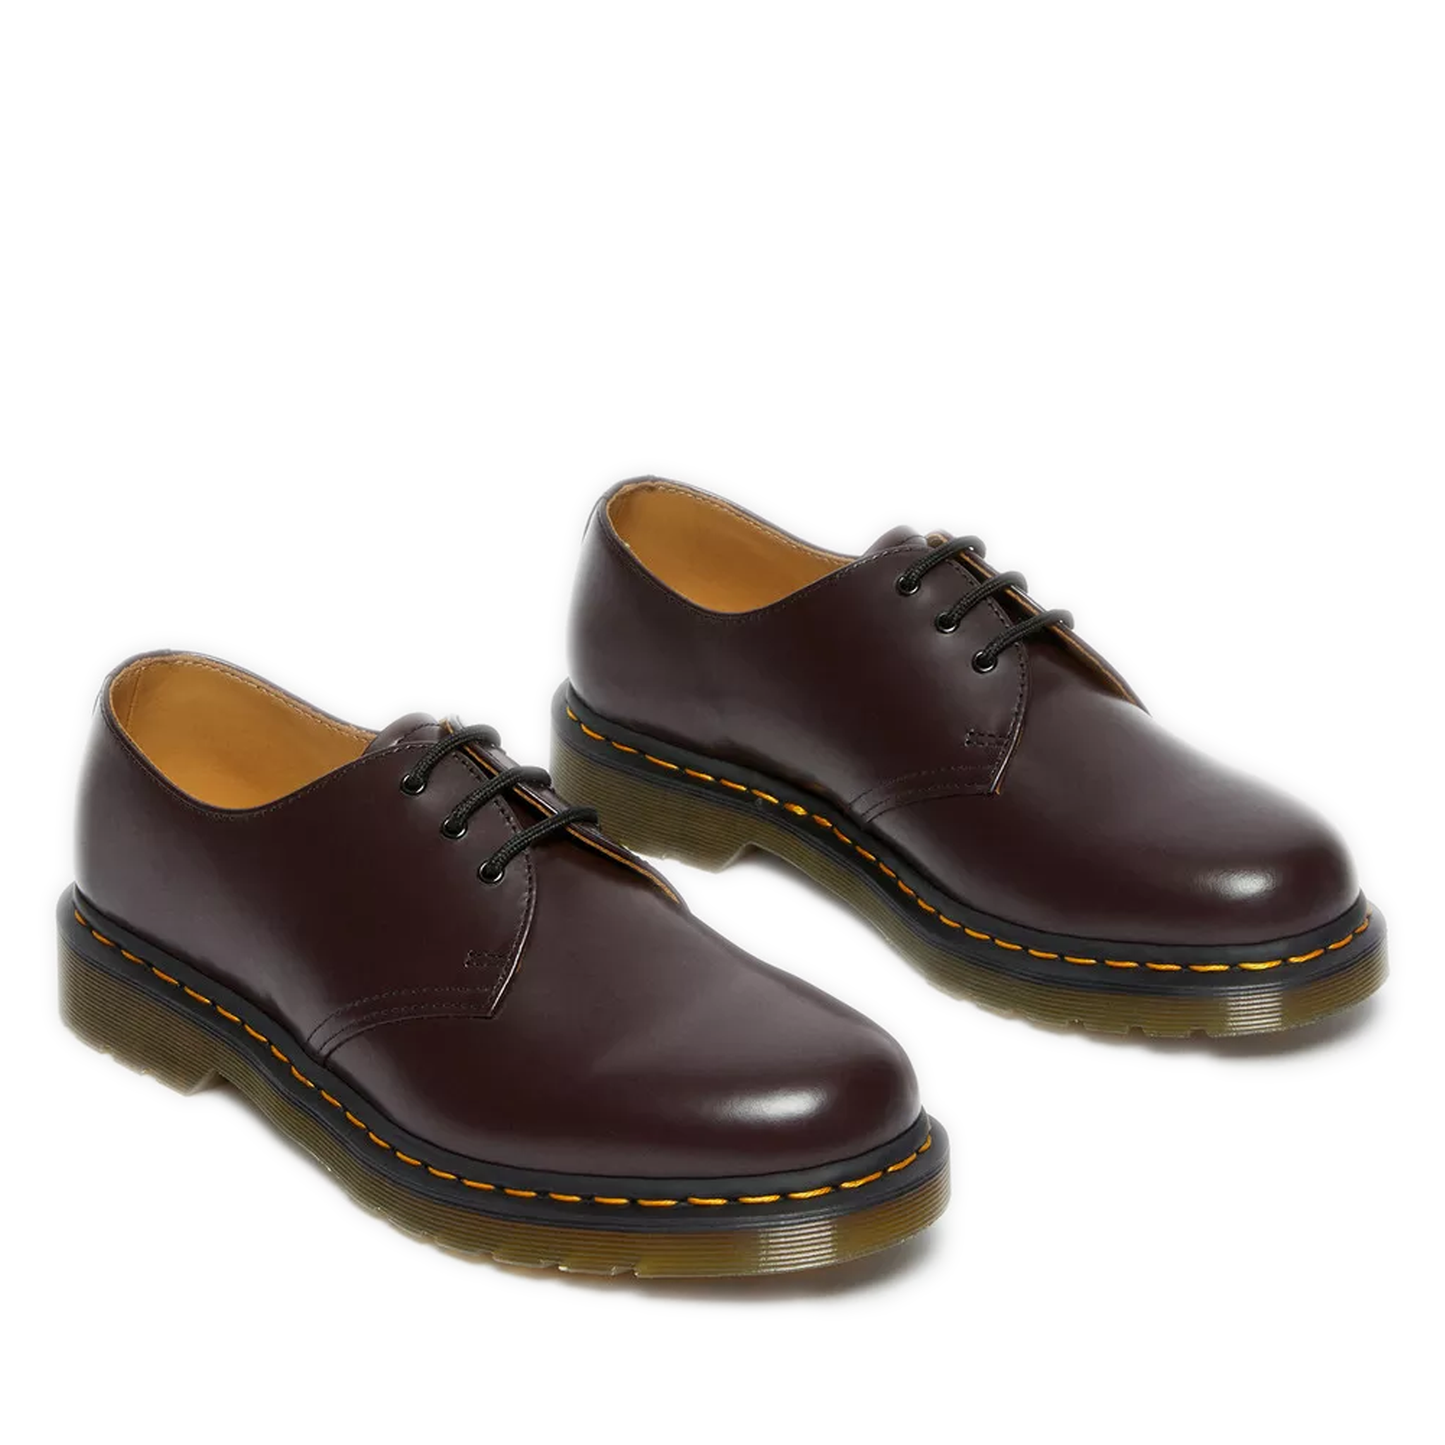 Men's Dr. Martens  1461 Smooth Leather Oxford Shoes - Burgundy Smooth